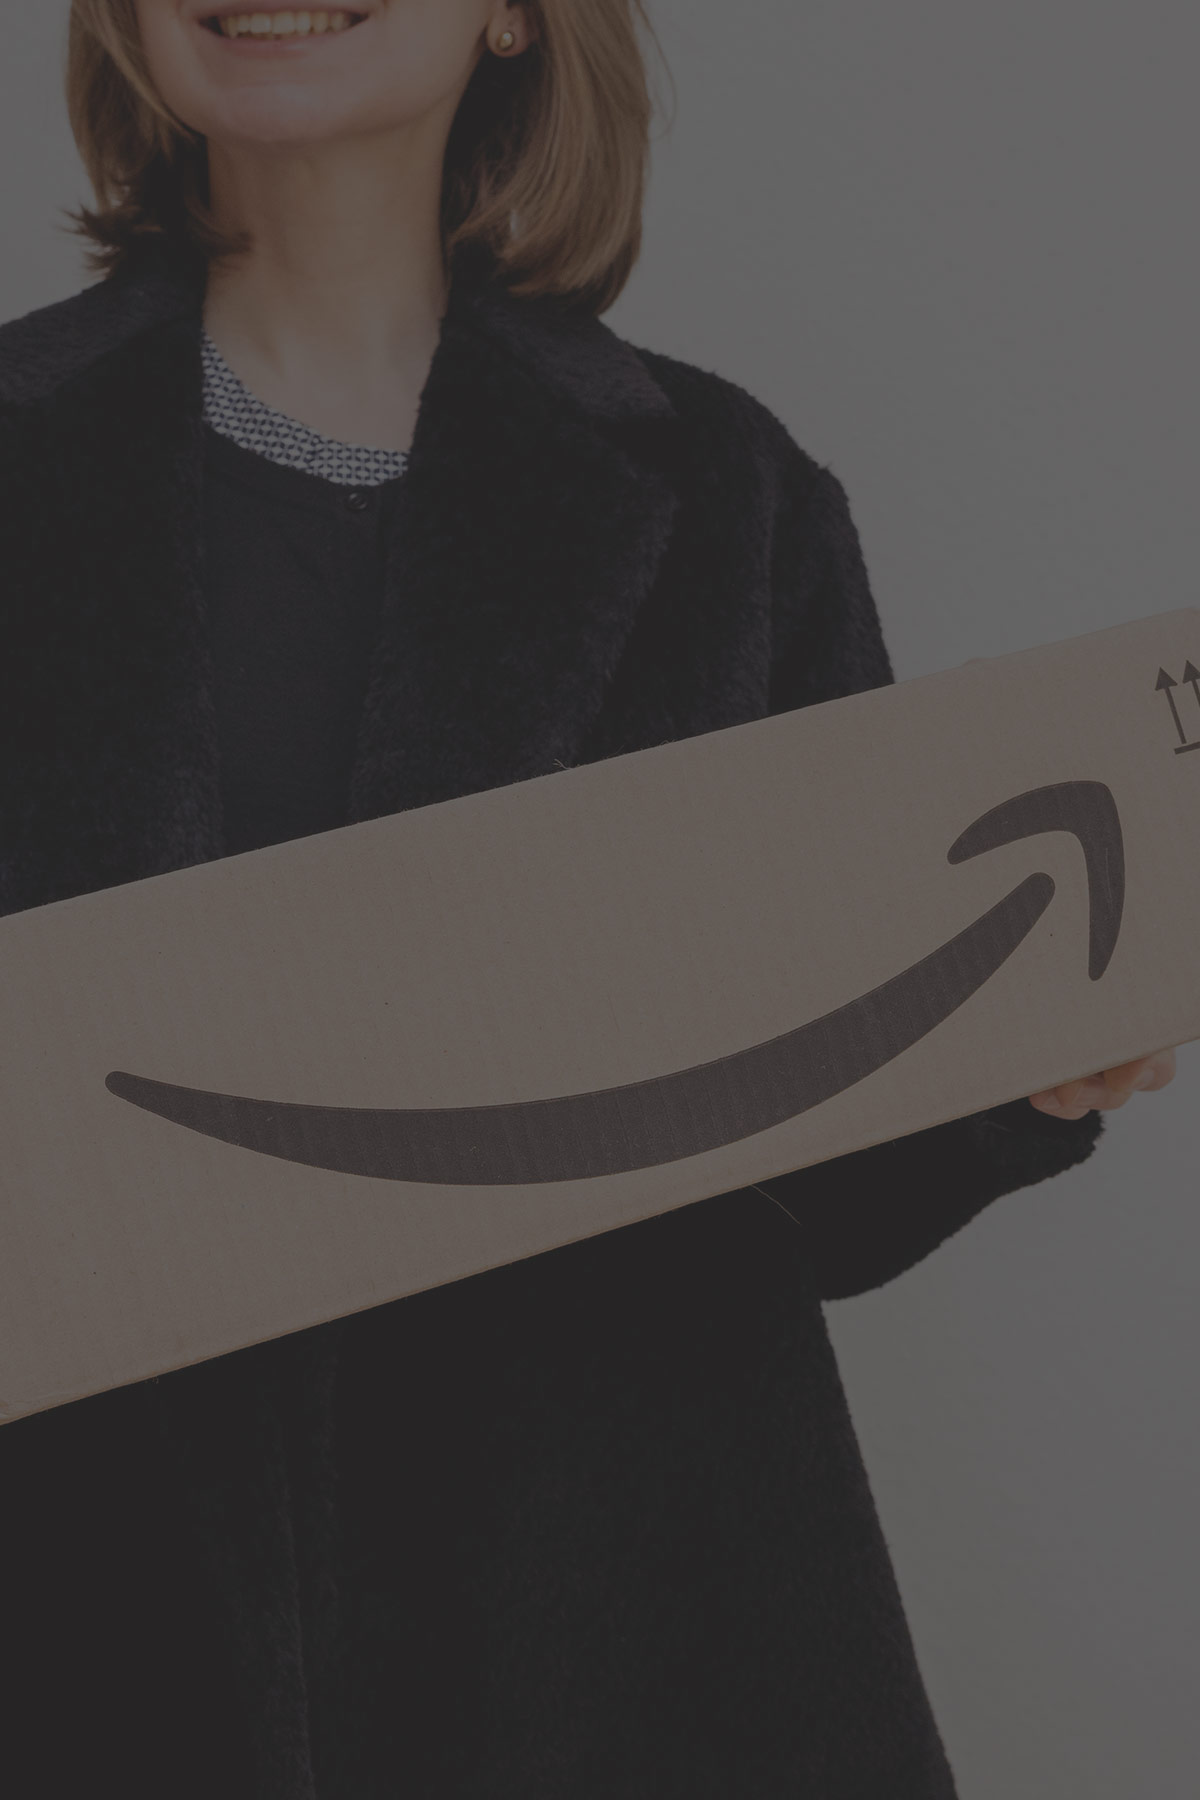 The-2020-Amazon-Advertising-Playbook-conclusion